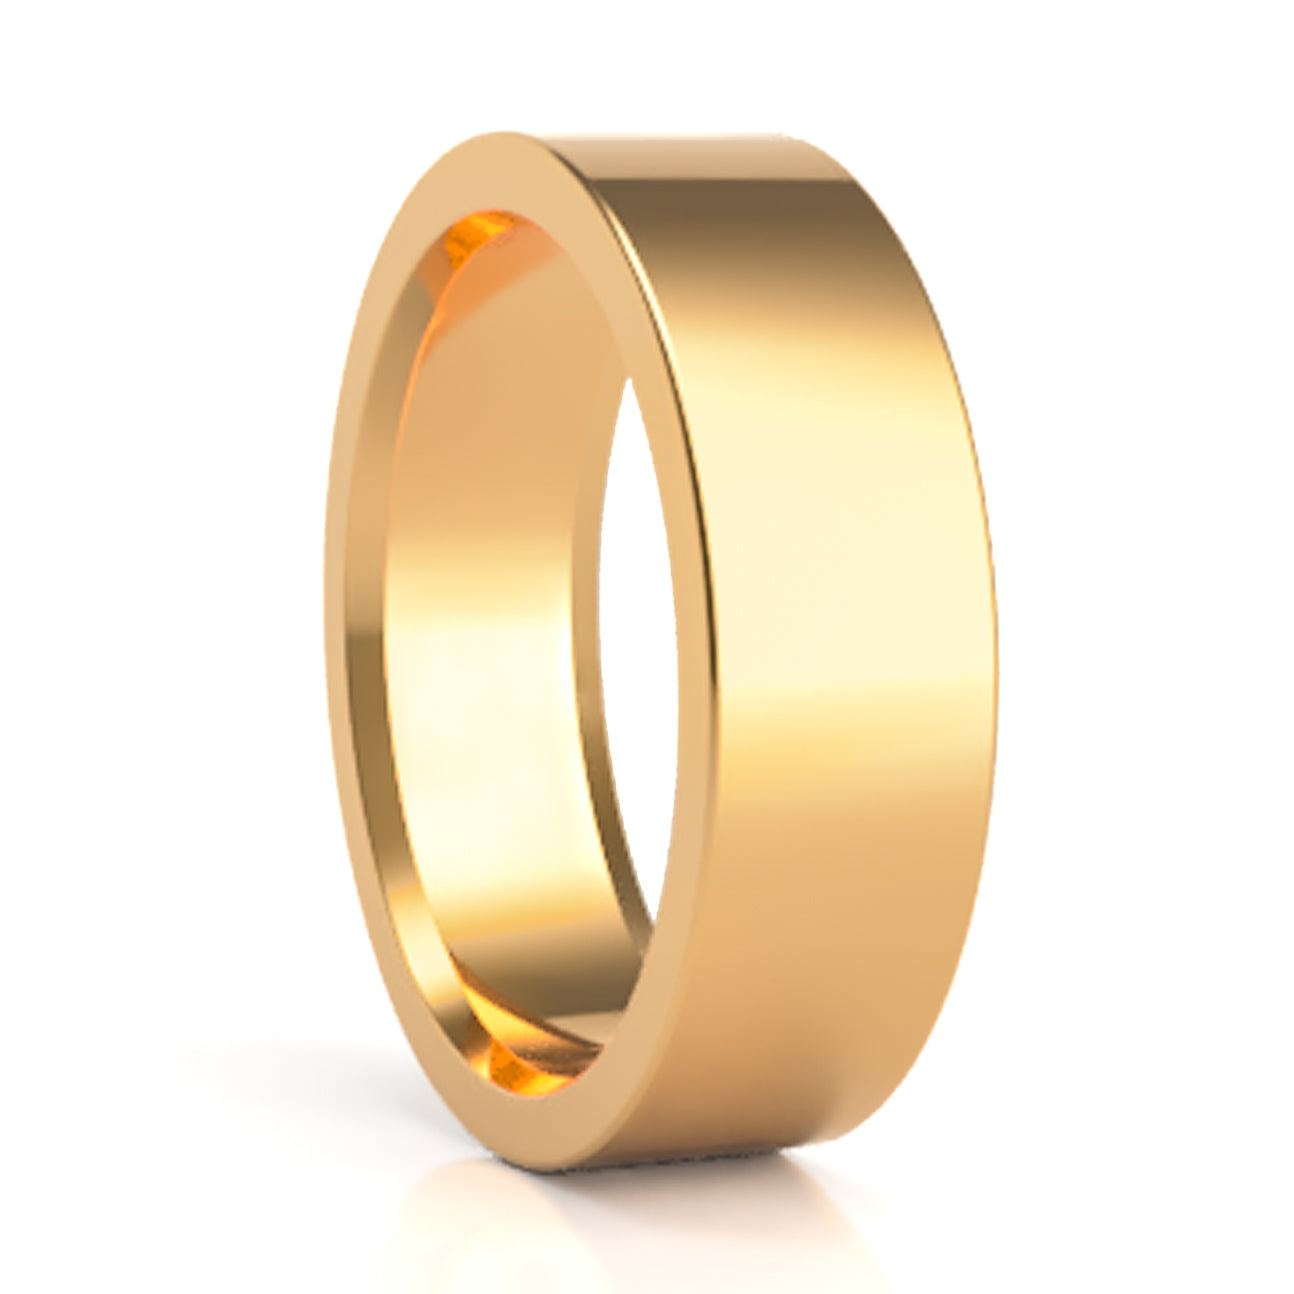 A 14k yellow gold traditional wedding band displayed on a neutral white background.